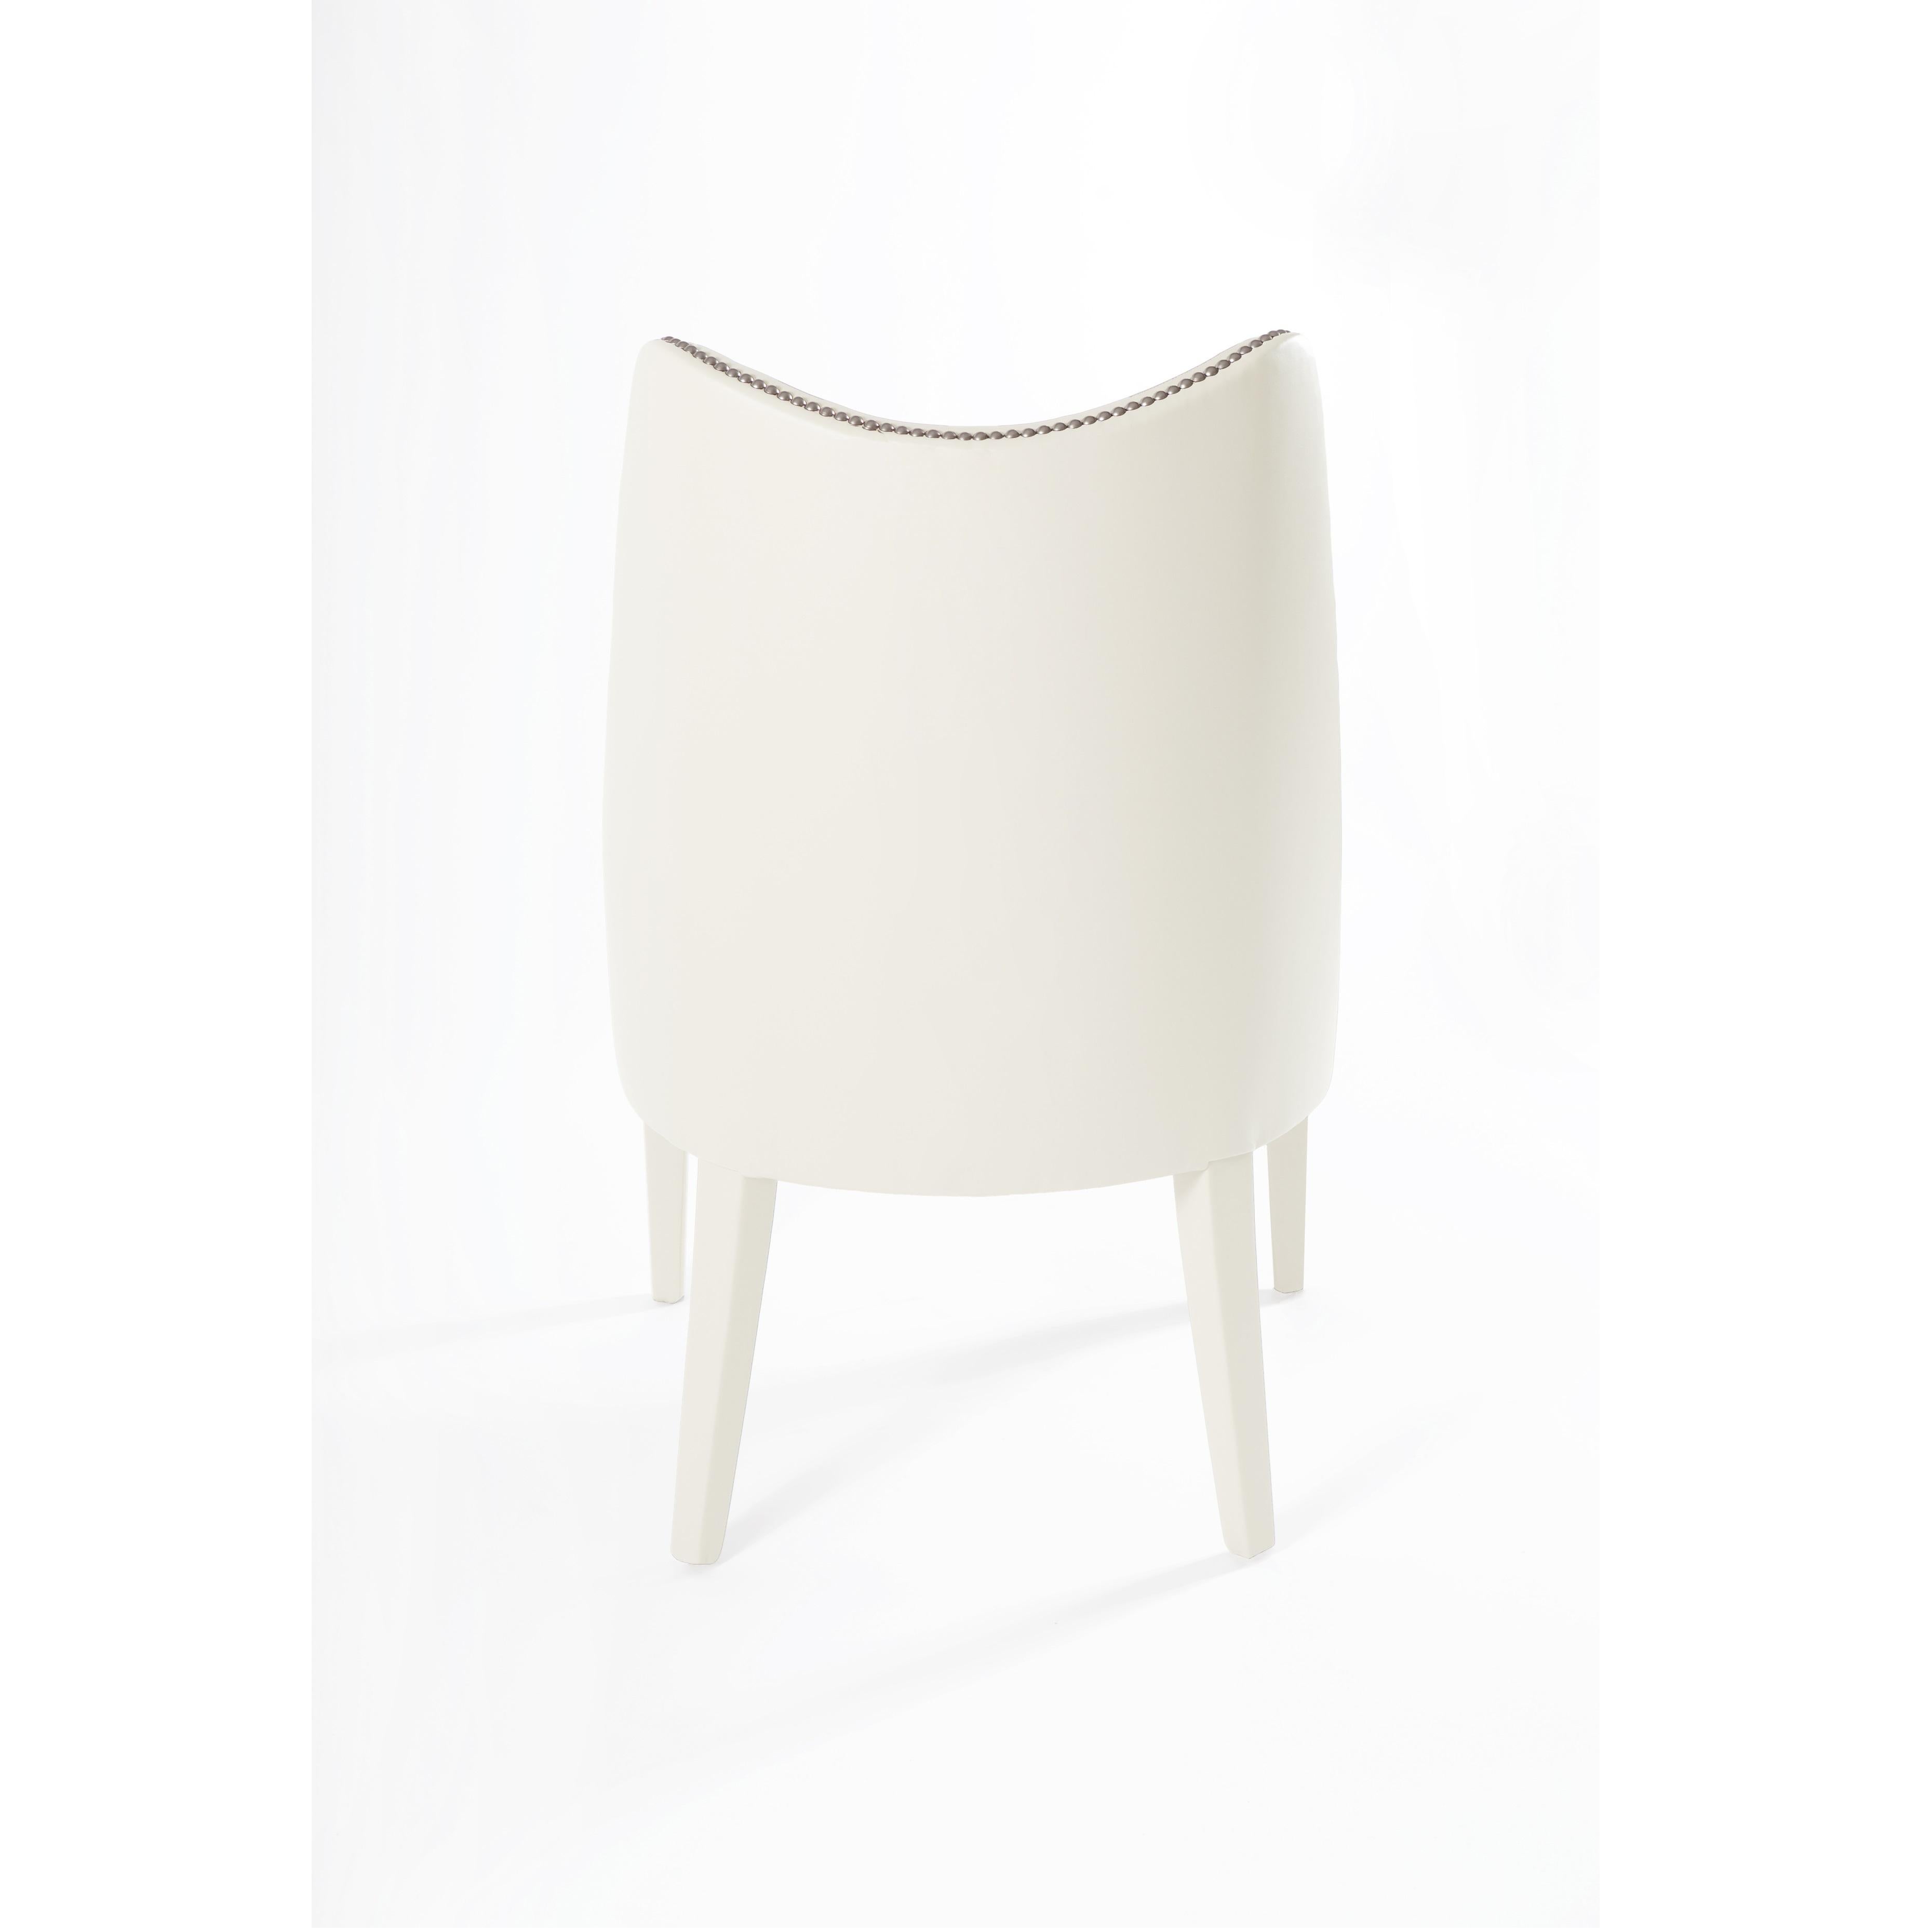 Contemporary Velvet Dining Chair Offered With Nails On The Curve & Back (Portugiesisch) im Angebot